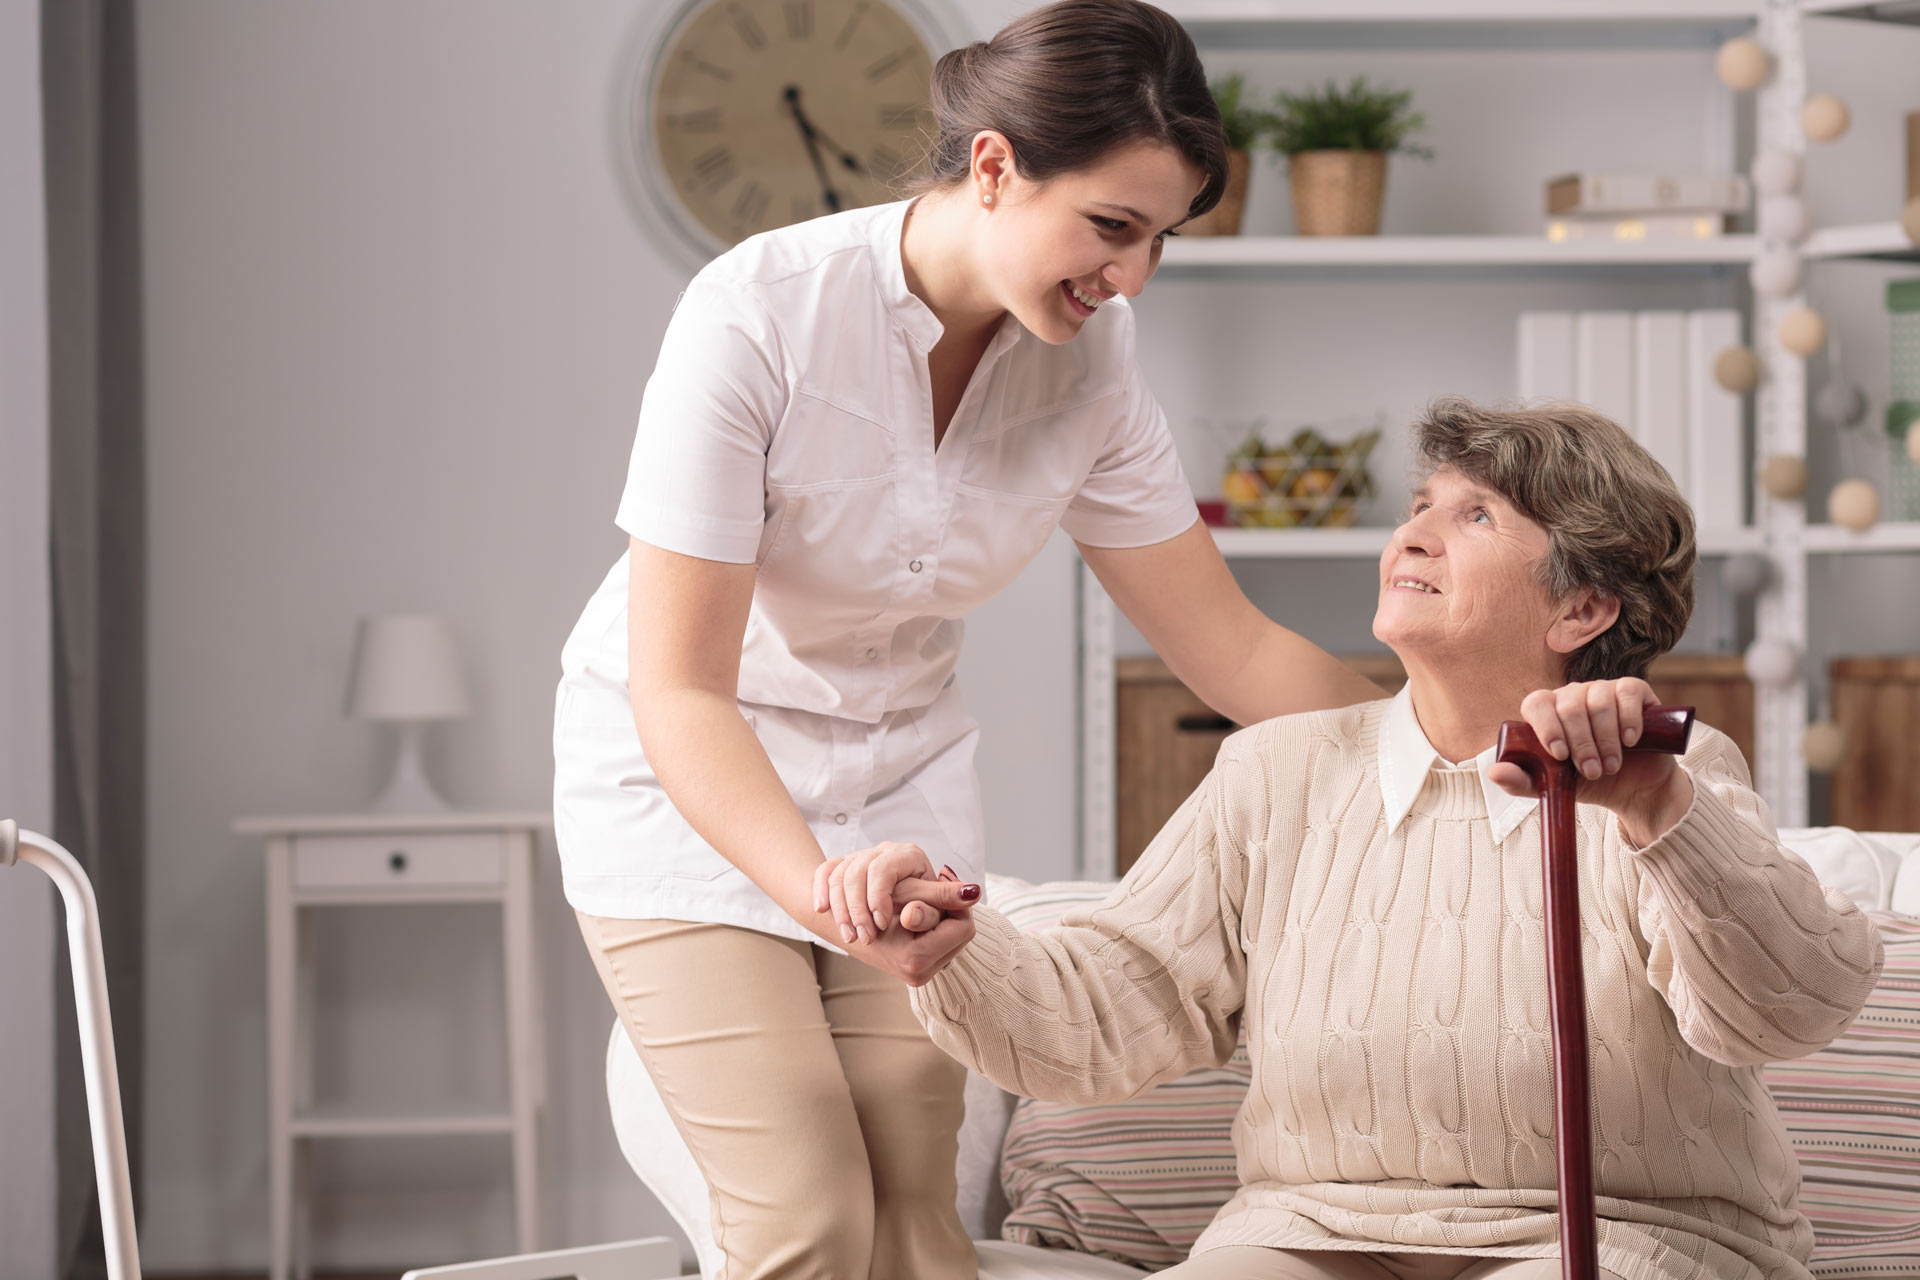 San Antonio home care worker helping lady stand up | Home to Home for Seniors San Antonio Senior Living and Assisted Living Advisor and Retirement Community Advisor and Locator Service